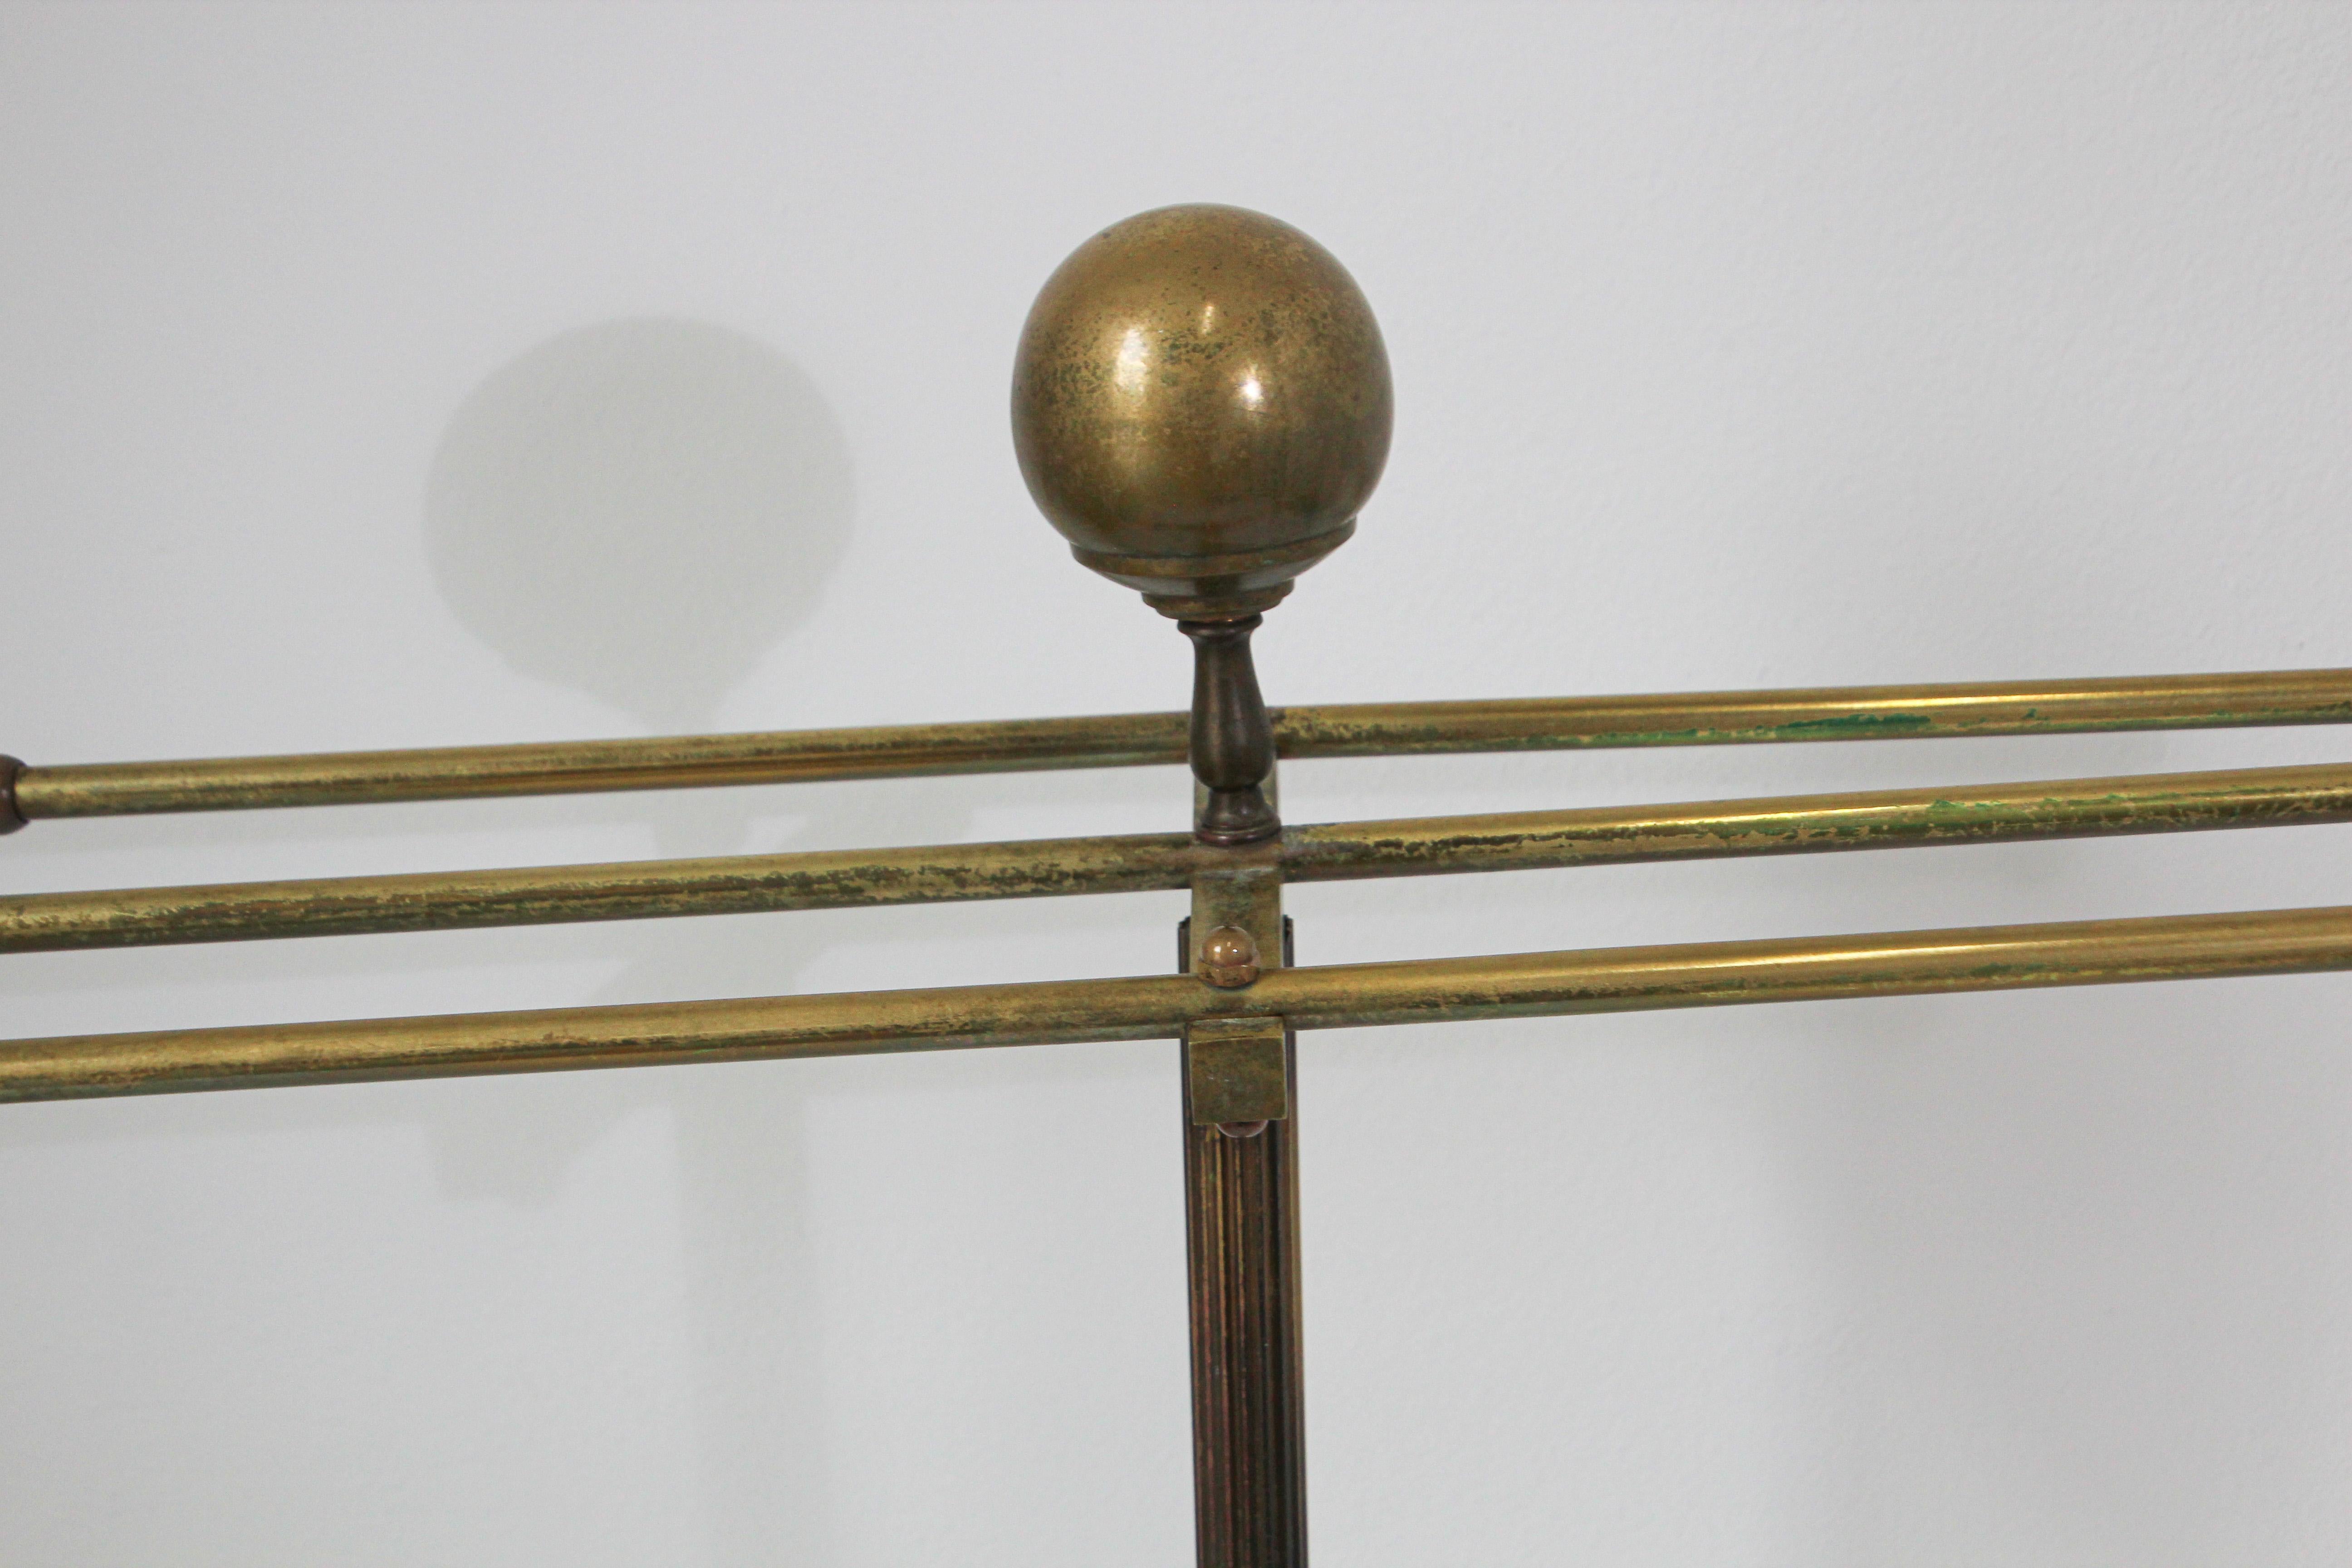 Hand-Crafted Antique Stylish Brass Towel Rack Valet Stand